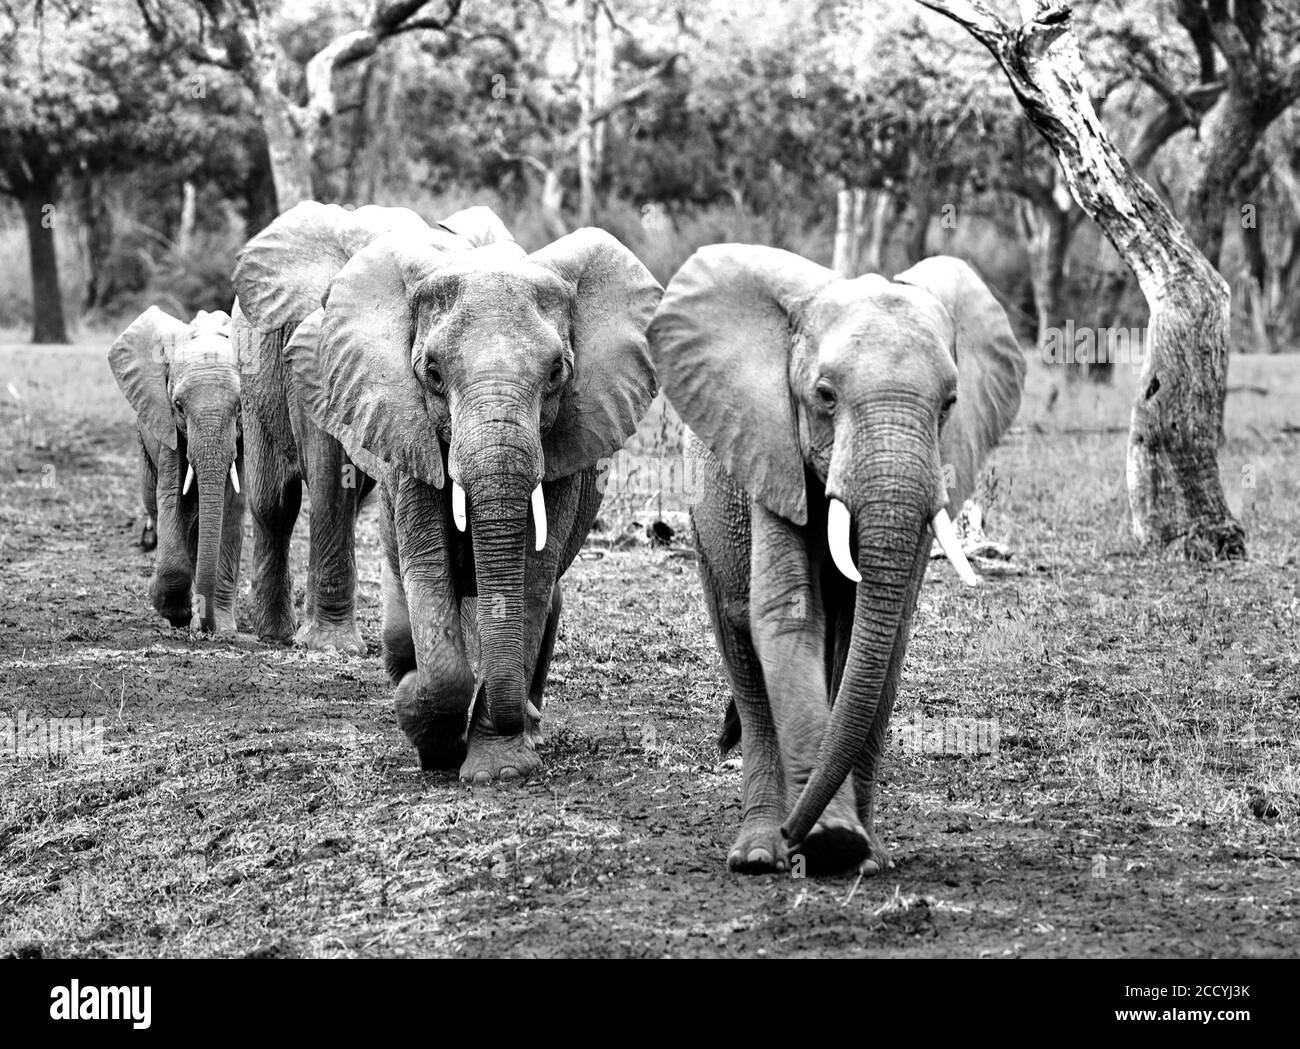 BVlack & White Image of a Herd of African Elephants walking through the African Bush with nice light and shadows. Some motion blur is visible.  South Stock Photo